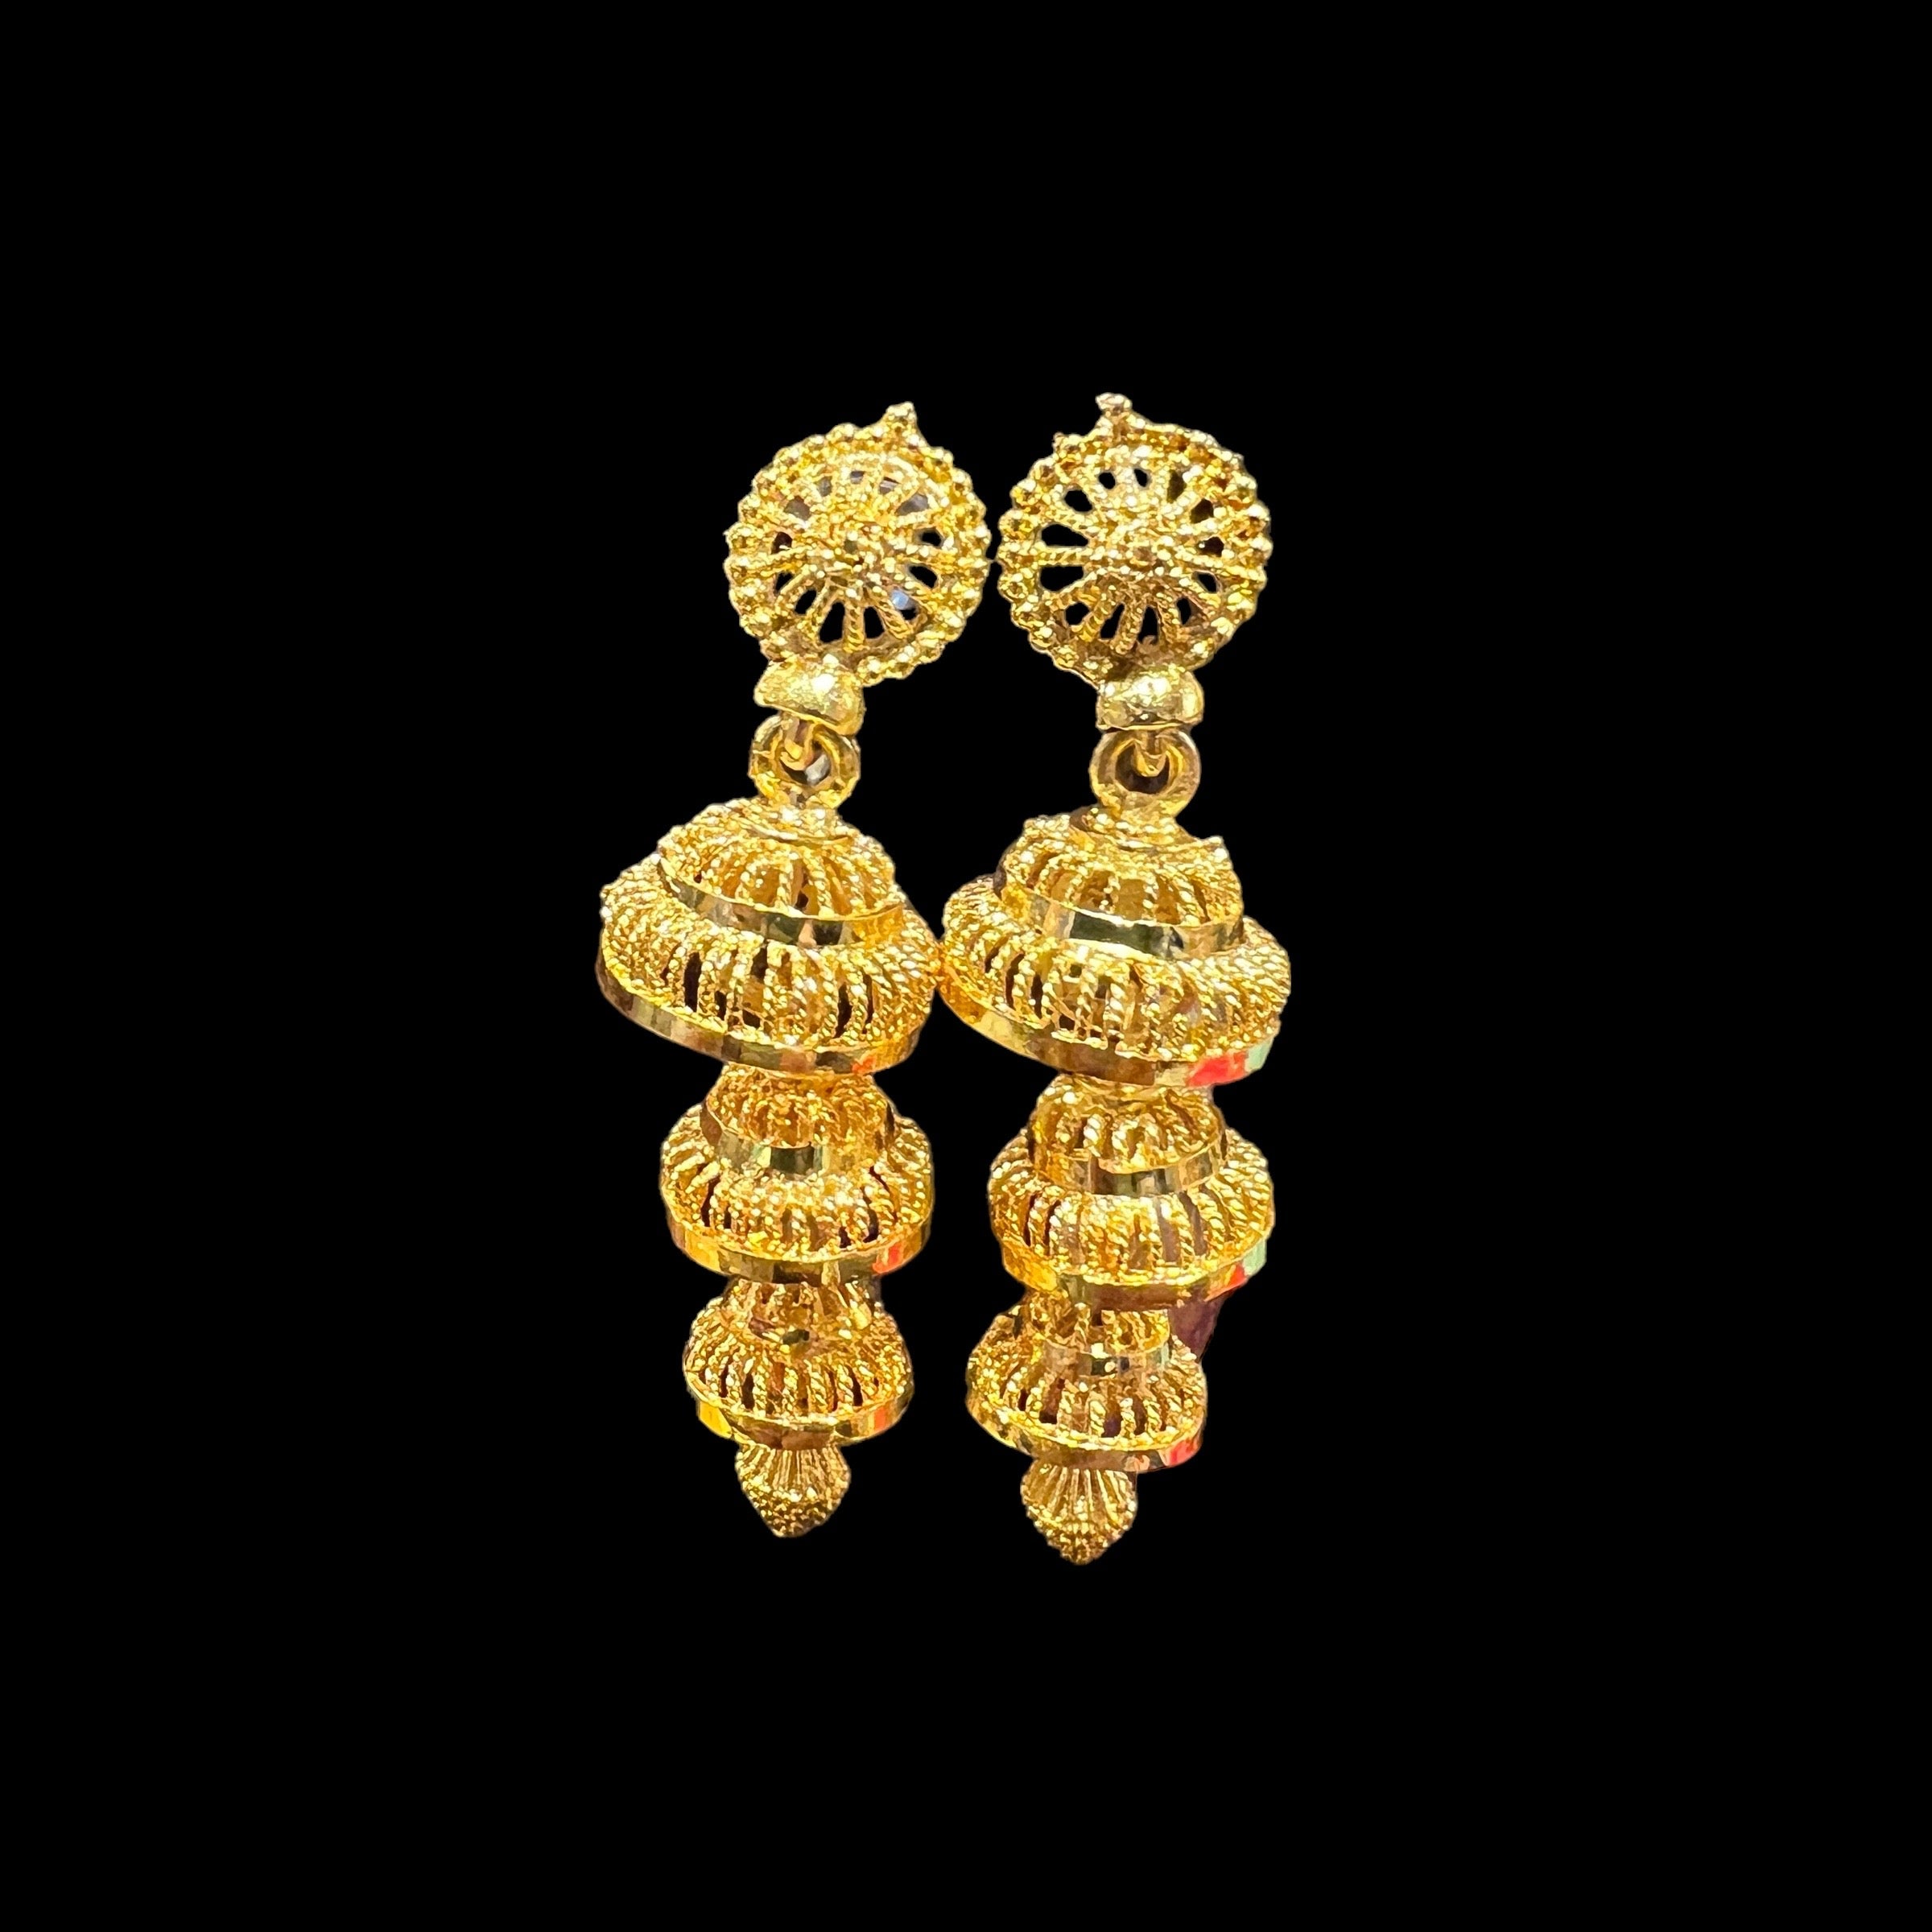 Three Tiered Gold Earrings 201 - Vintage India NYC